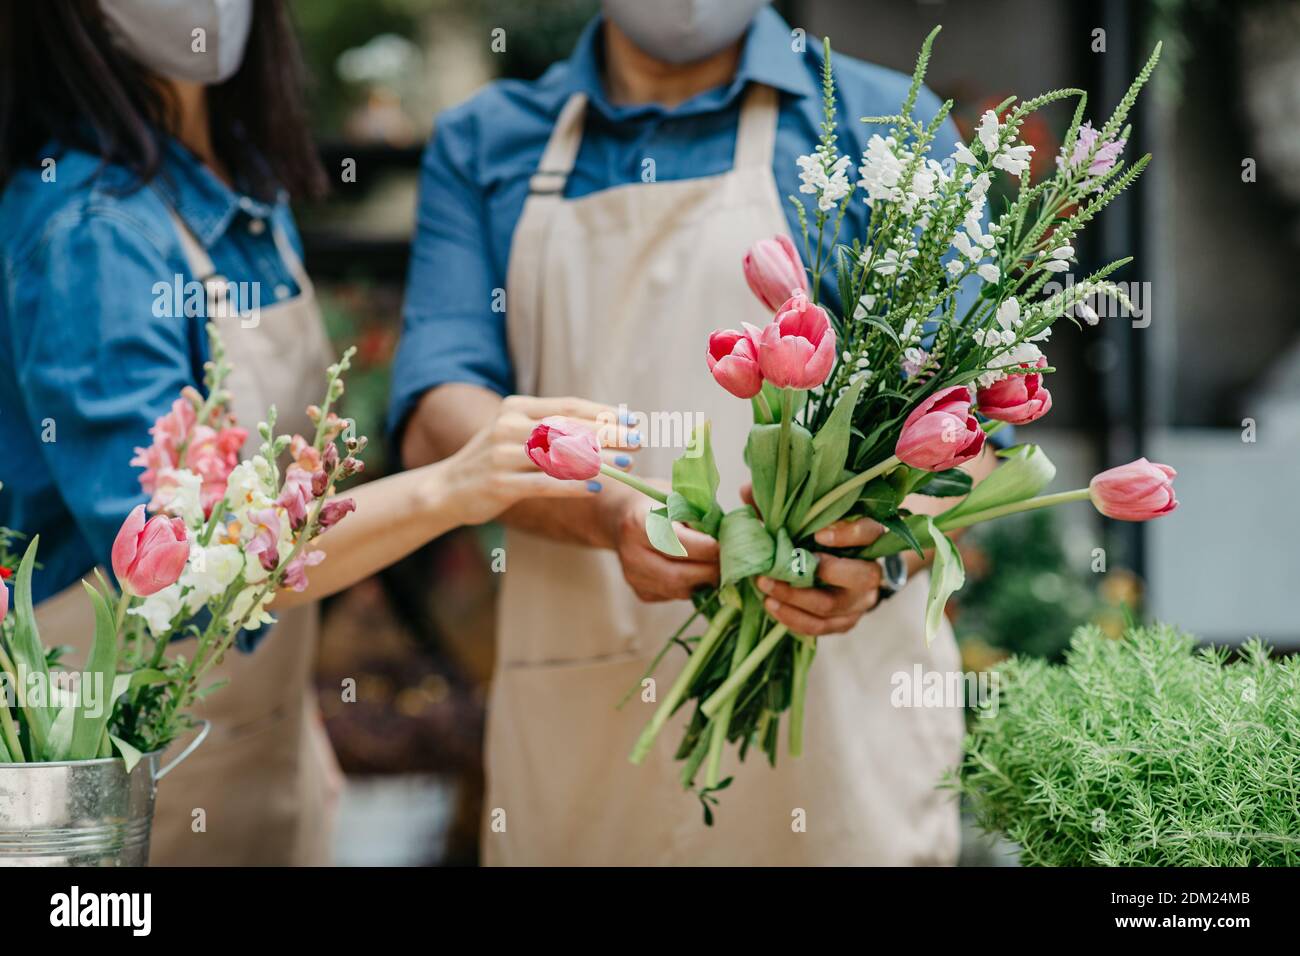 Covid-19 pandemic, floral decor and small business Stock Photo